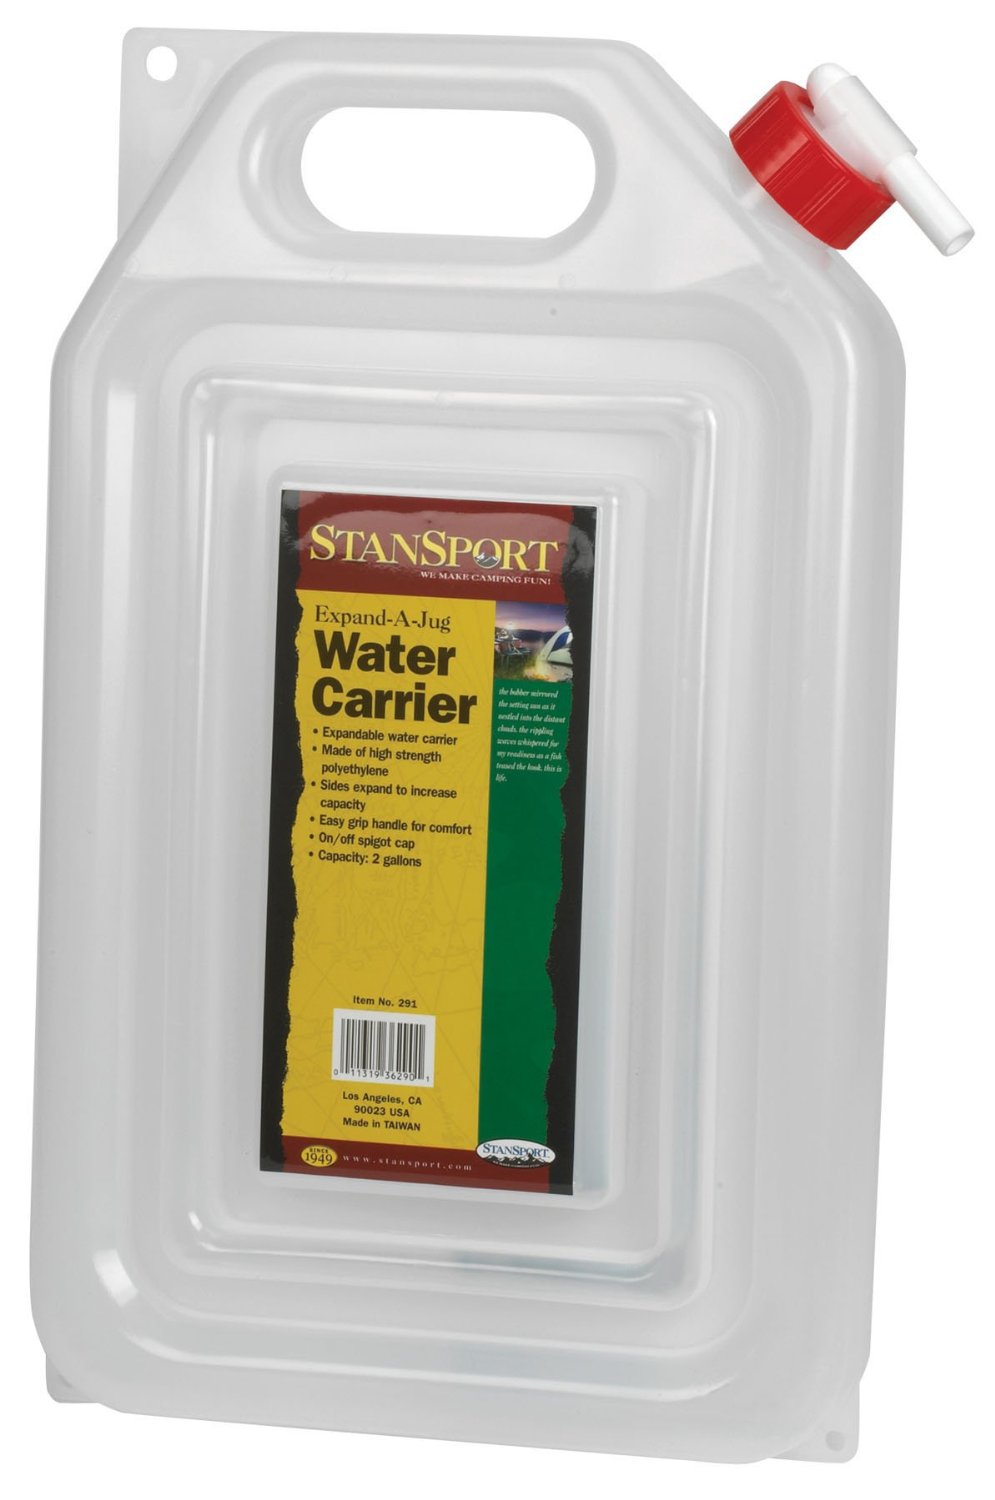 Stansport Outdoor 291 2-Gallon Expand-A-Jug Water Carrier-eSafety Supplies, Inc